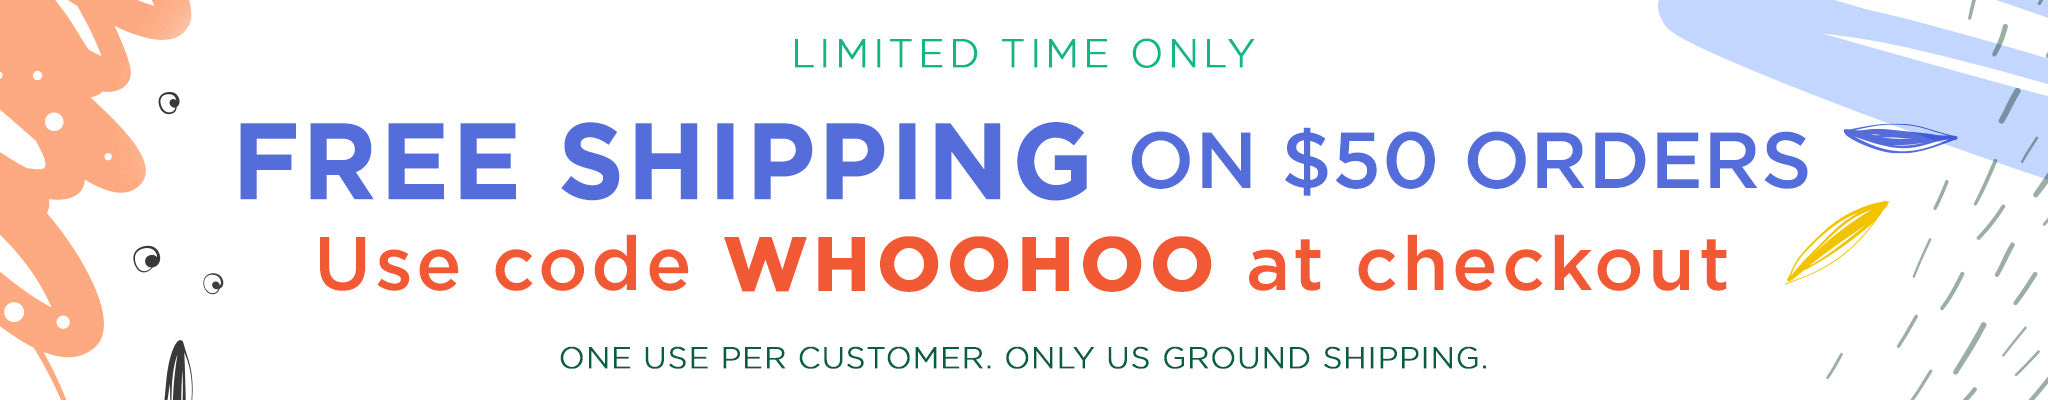 Free Shipping on $50 Orders | Use code WHOOHOO at checkout | One use per customer. Only US ground shipping.